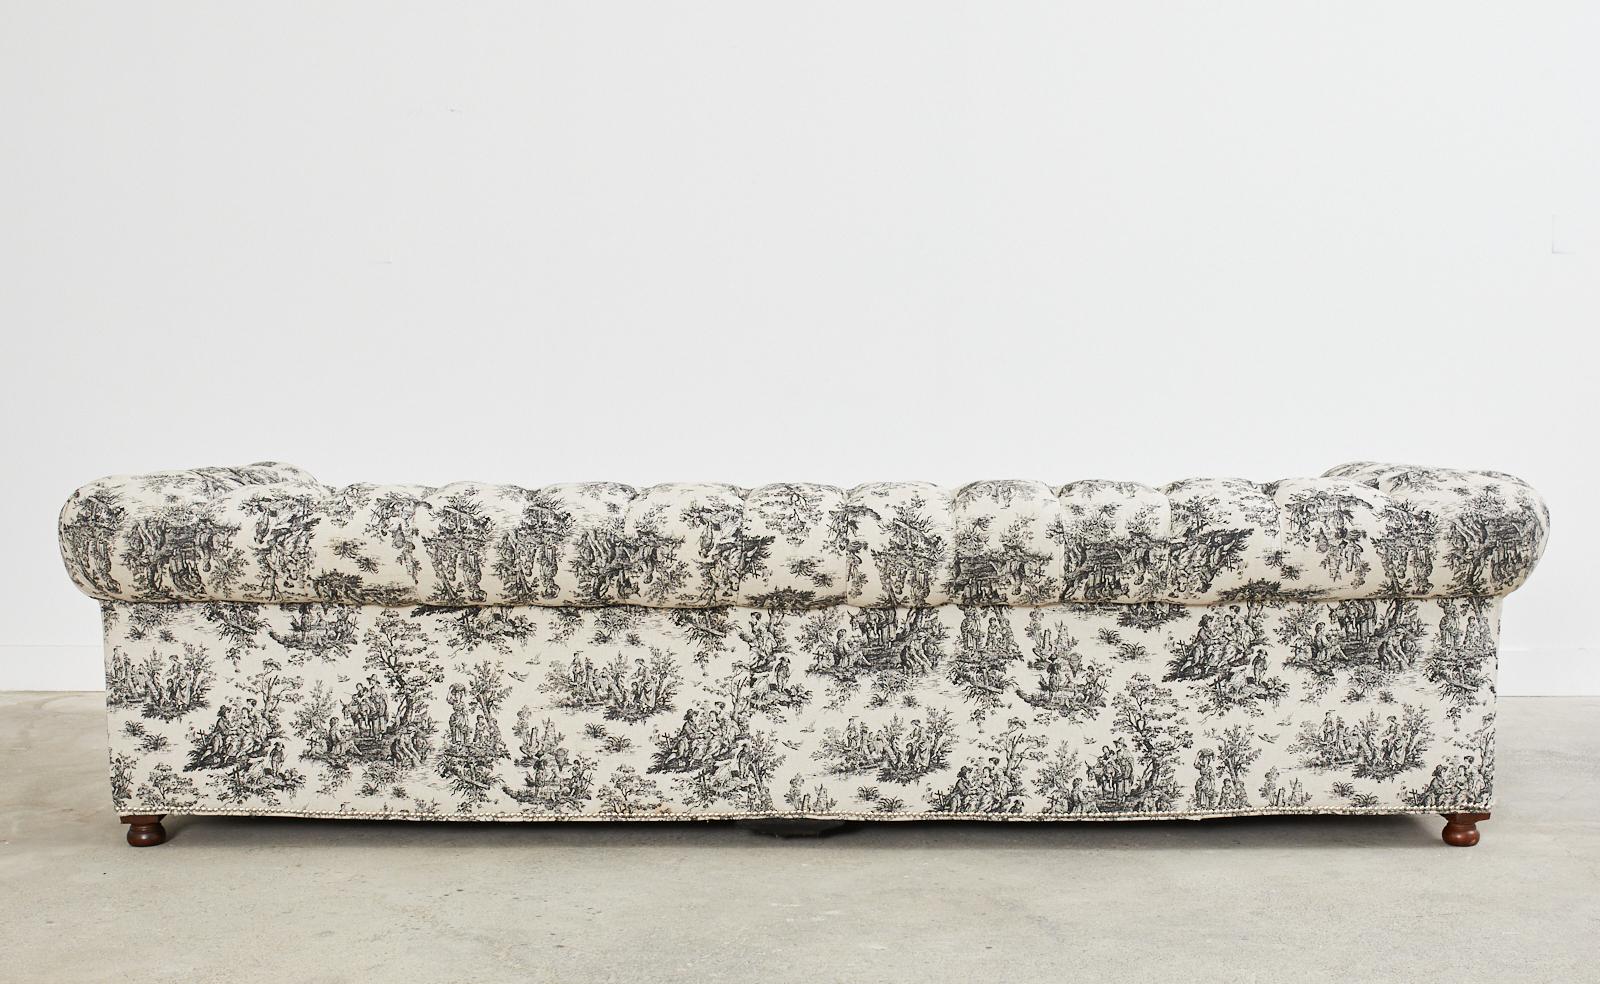 Christian Audigier Grande-Dame French Provincial Toile Tufted Sofa For Sale 7